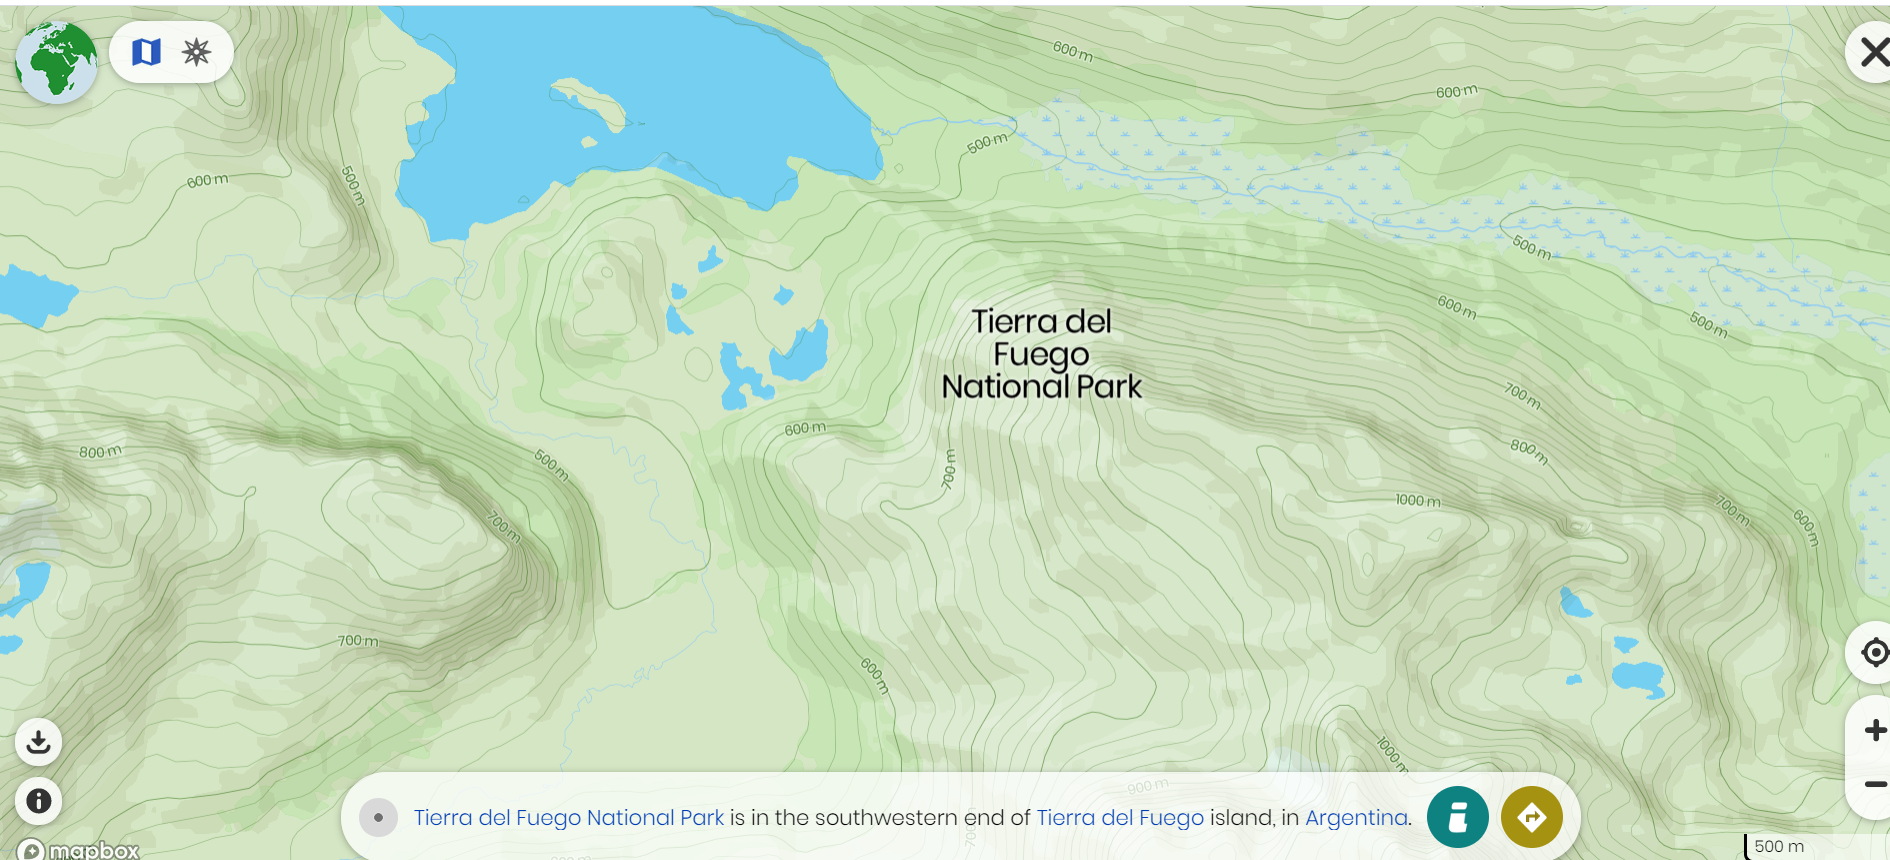 A close up of a map

Description automatically generated